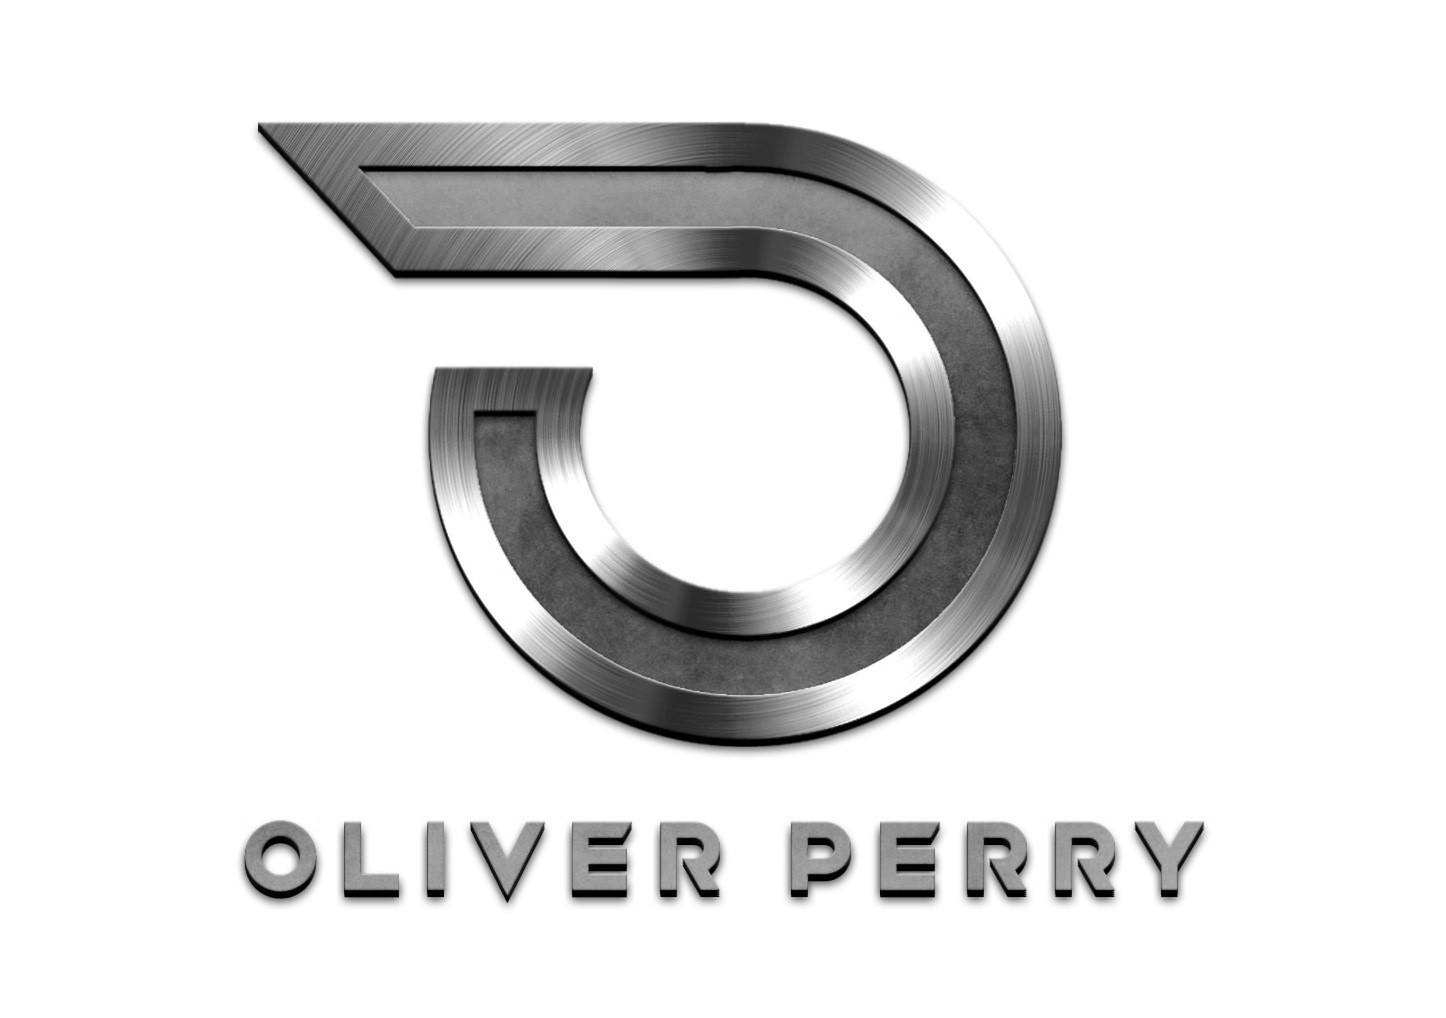  OLIVER PERRY